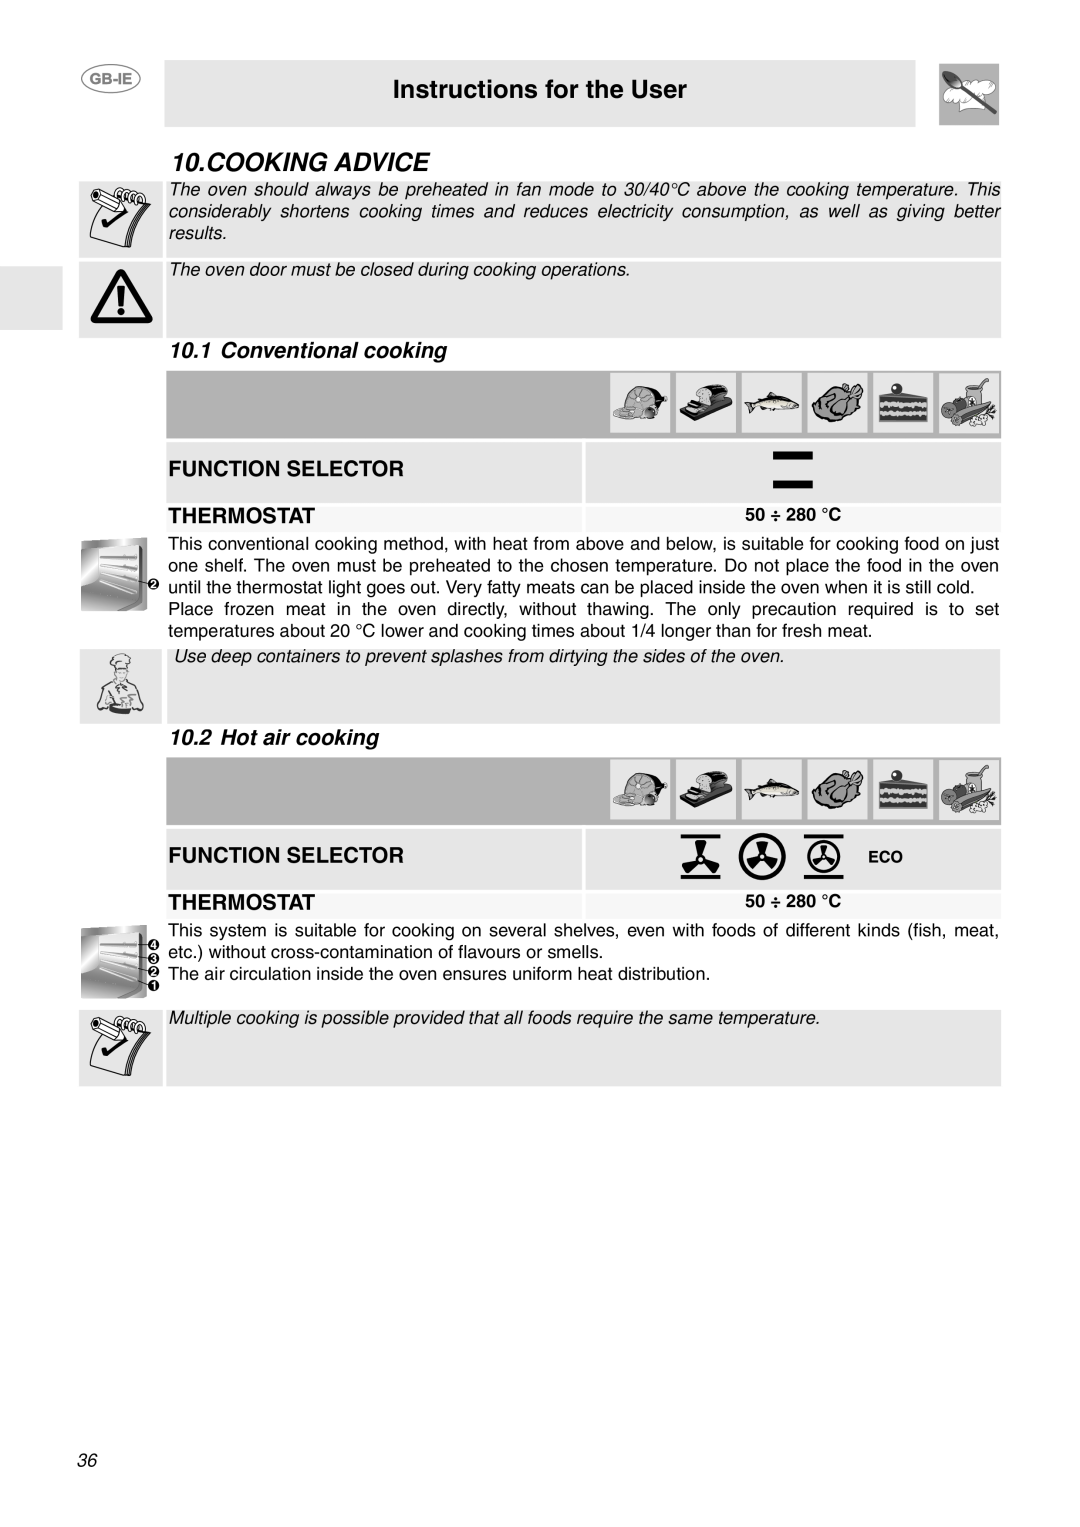 Smeg FP850APZ manual Cooking Advice, Conventional cooking, Function Selector, Thermostat, Hot air cooking 